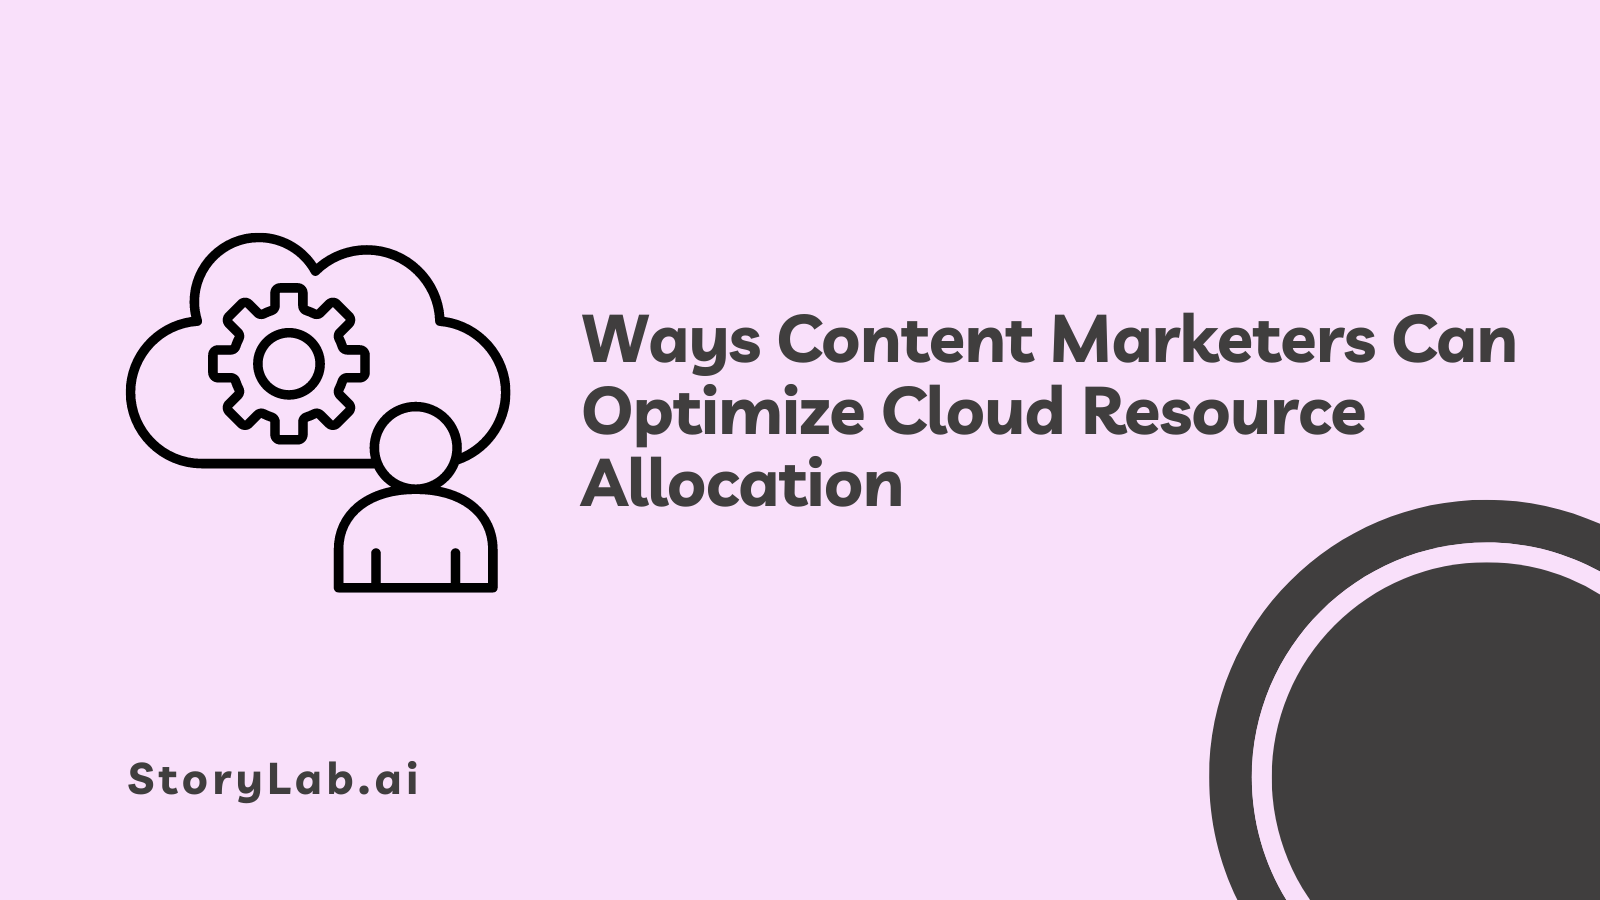 Ways Content Marketers Can Optimize Cloud Resource Allocation